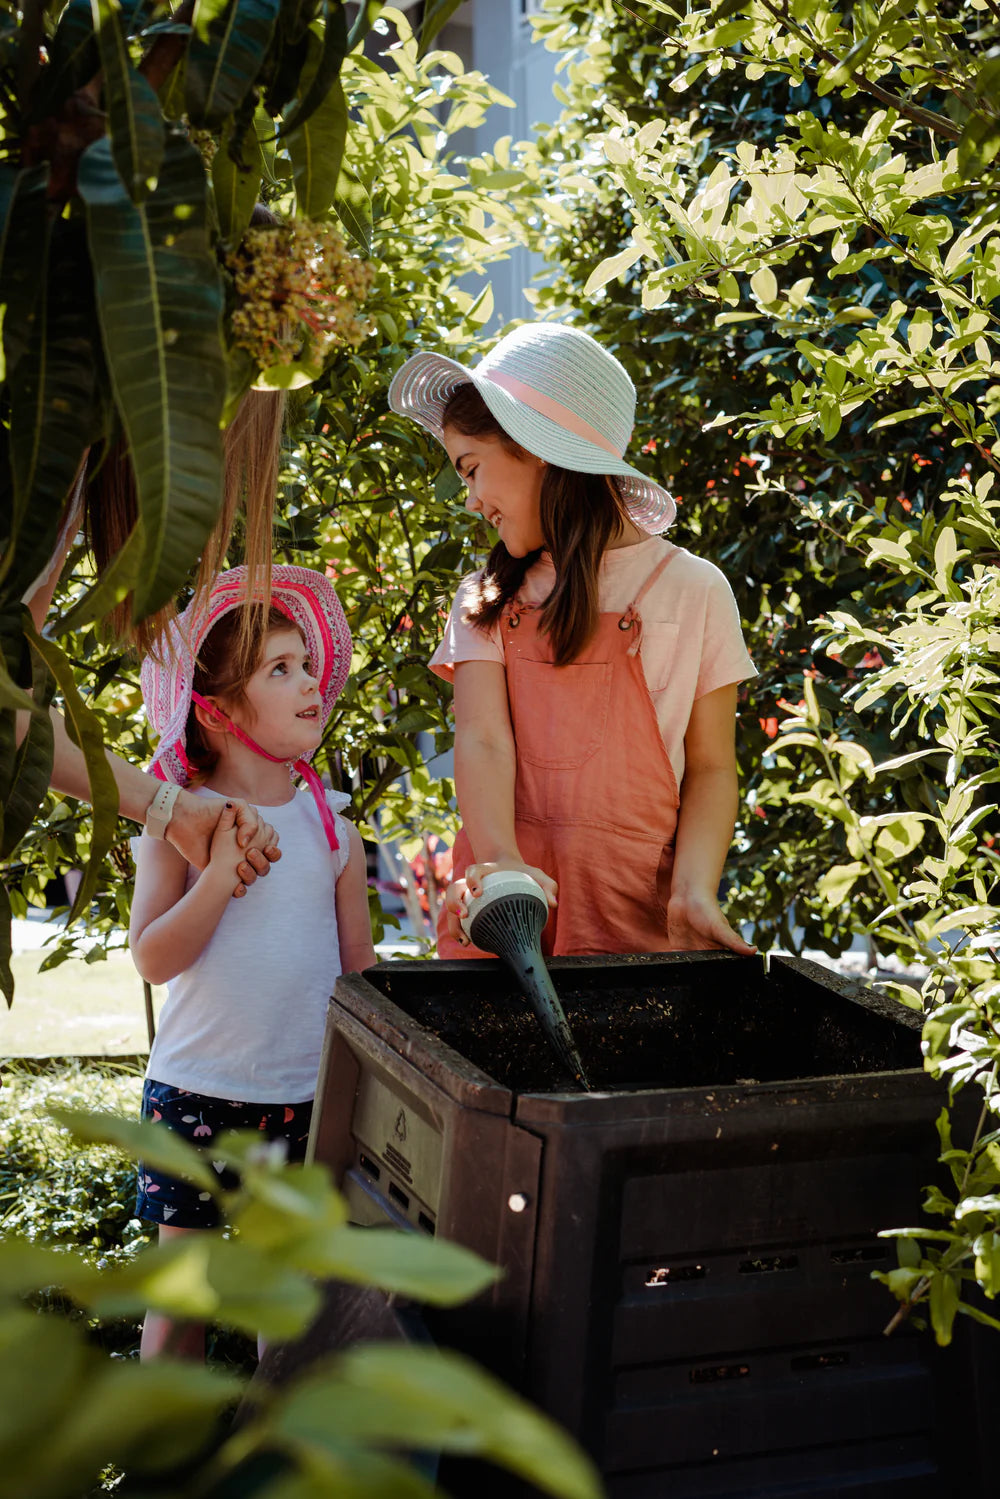 Compost Matchmaking: What composter is right for you?